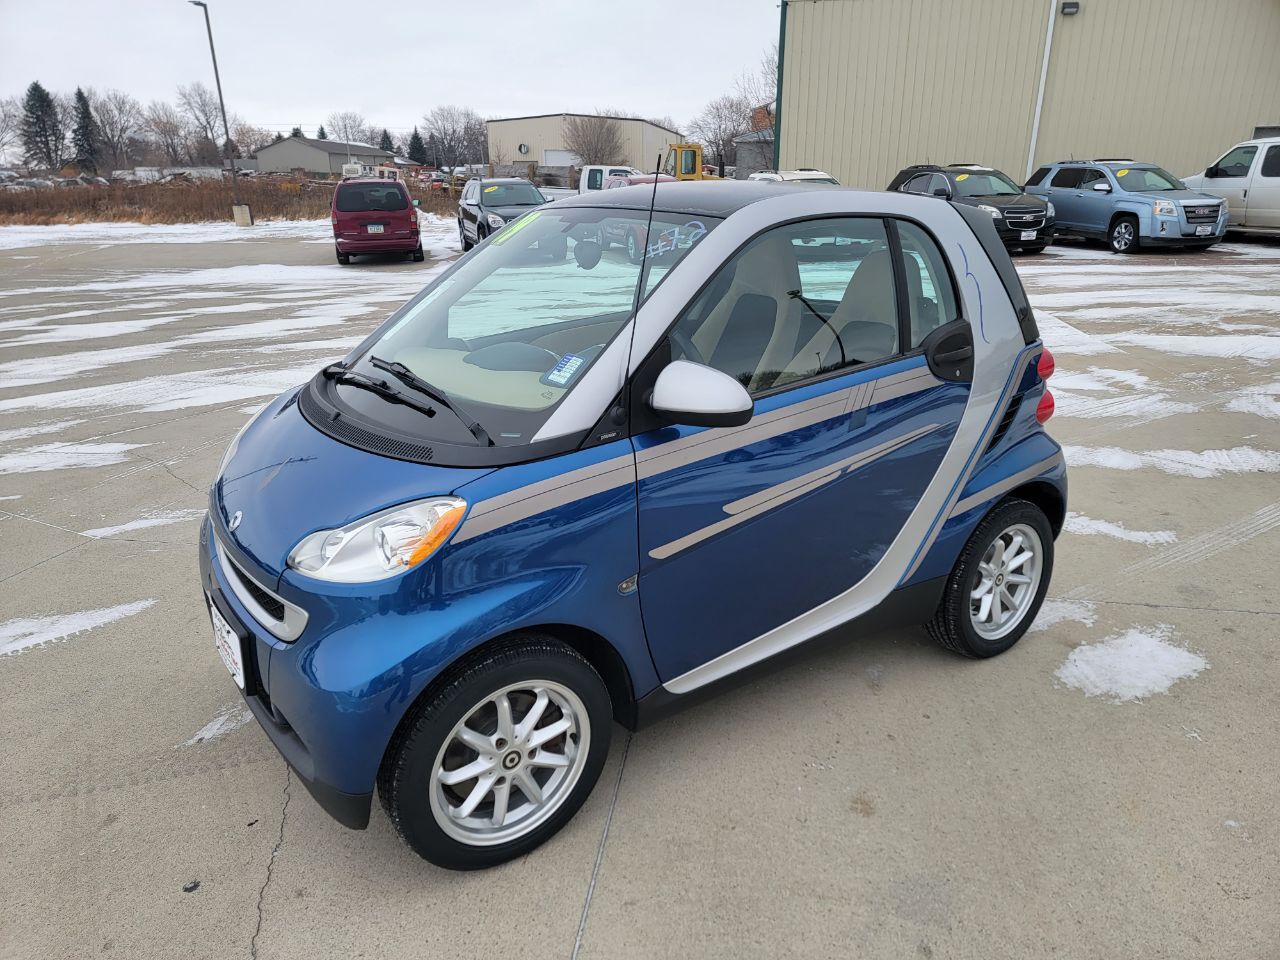 2009 Smart fortwo For Sale - Carsforsale.com®